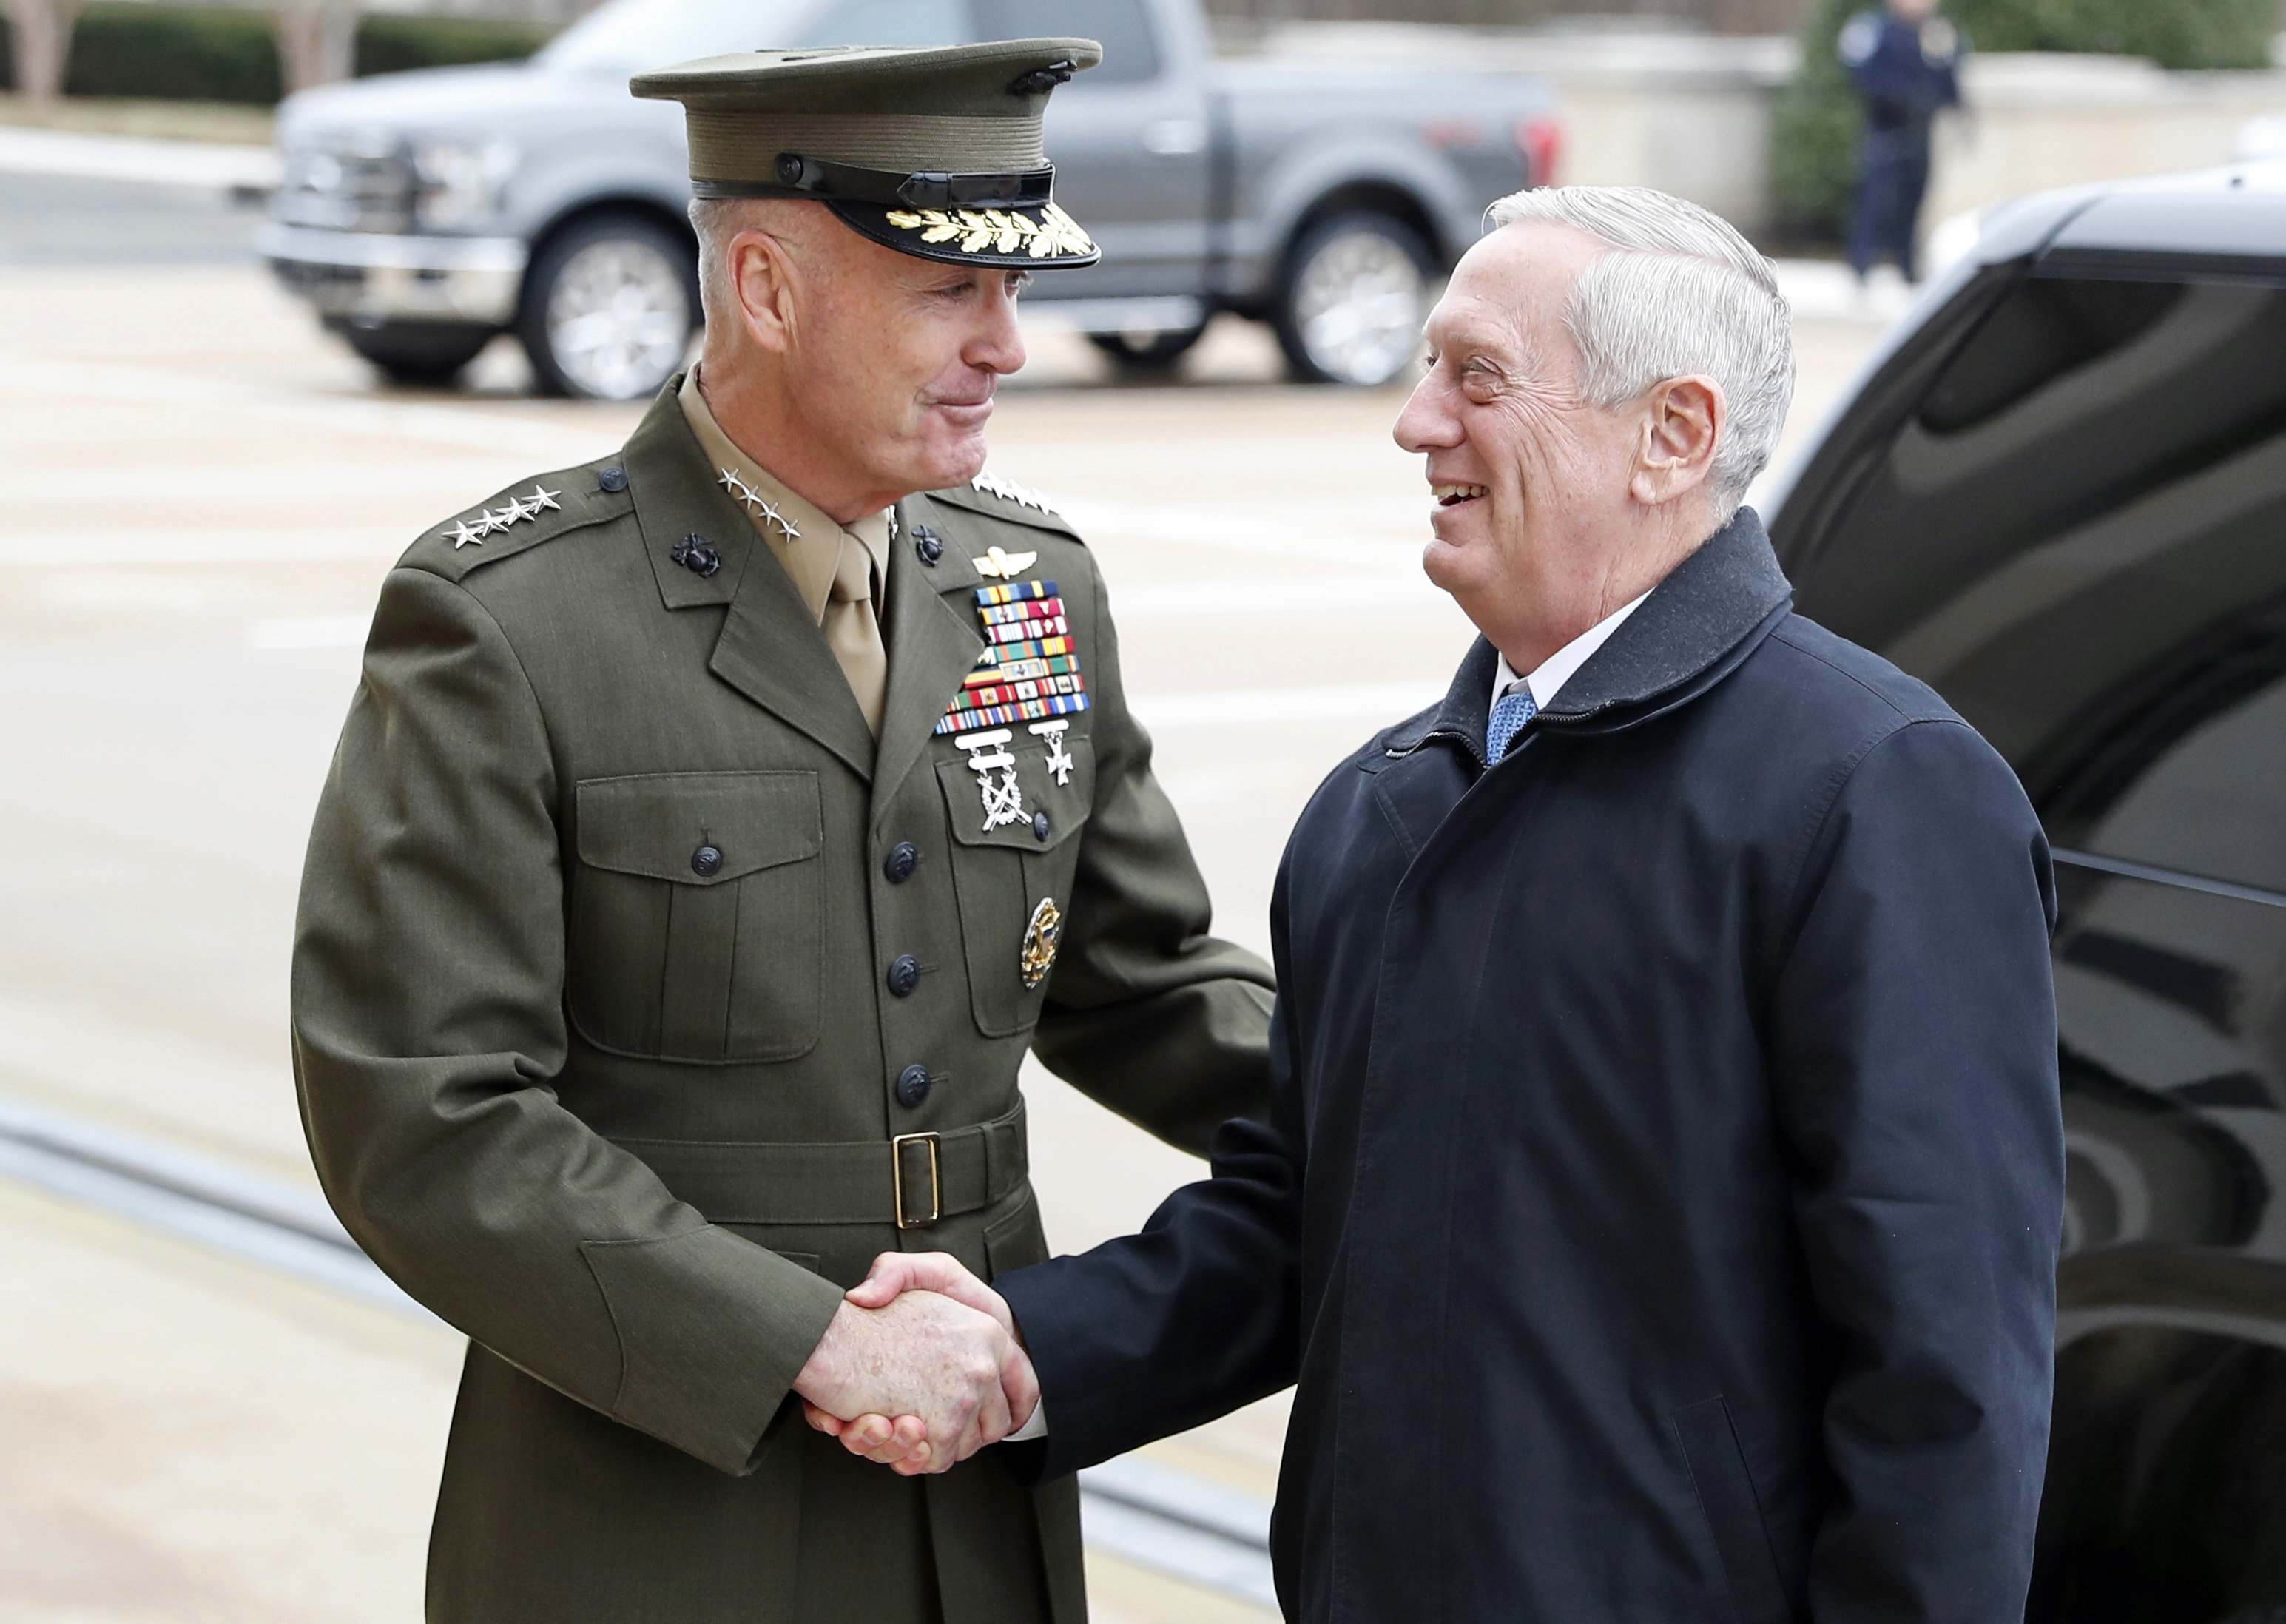 FILE - In this Jan. 21, 2107 file photo, Joint Chiefs Chairman Gen. Joseph Dunford greets Defense Secretary Jimn Mattis at the Pentagon. A new military strategy to meet President Donald Trump’s demand “to obliterate” the Islamic State group is likely to deepen U.S. military involvement in Syria, possibly with more ground troops, even as the current U.S. approach in Iraq appears to be working and will require fewer changes. Dunford said Feb. 23 that the strategy will take aim not just at the Islamic State but at al-Qaida and other extremist organizations in the Middle East and beyond whose goal is to attack the United States. He emphasized that it would not rest mainly on military might.